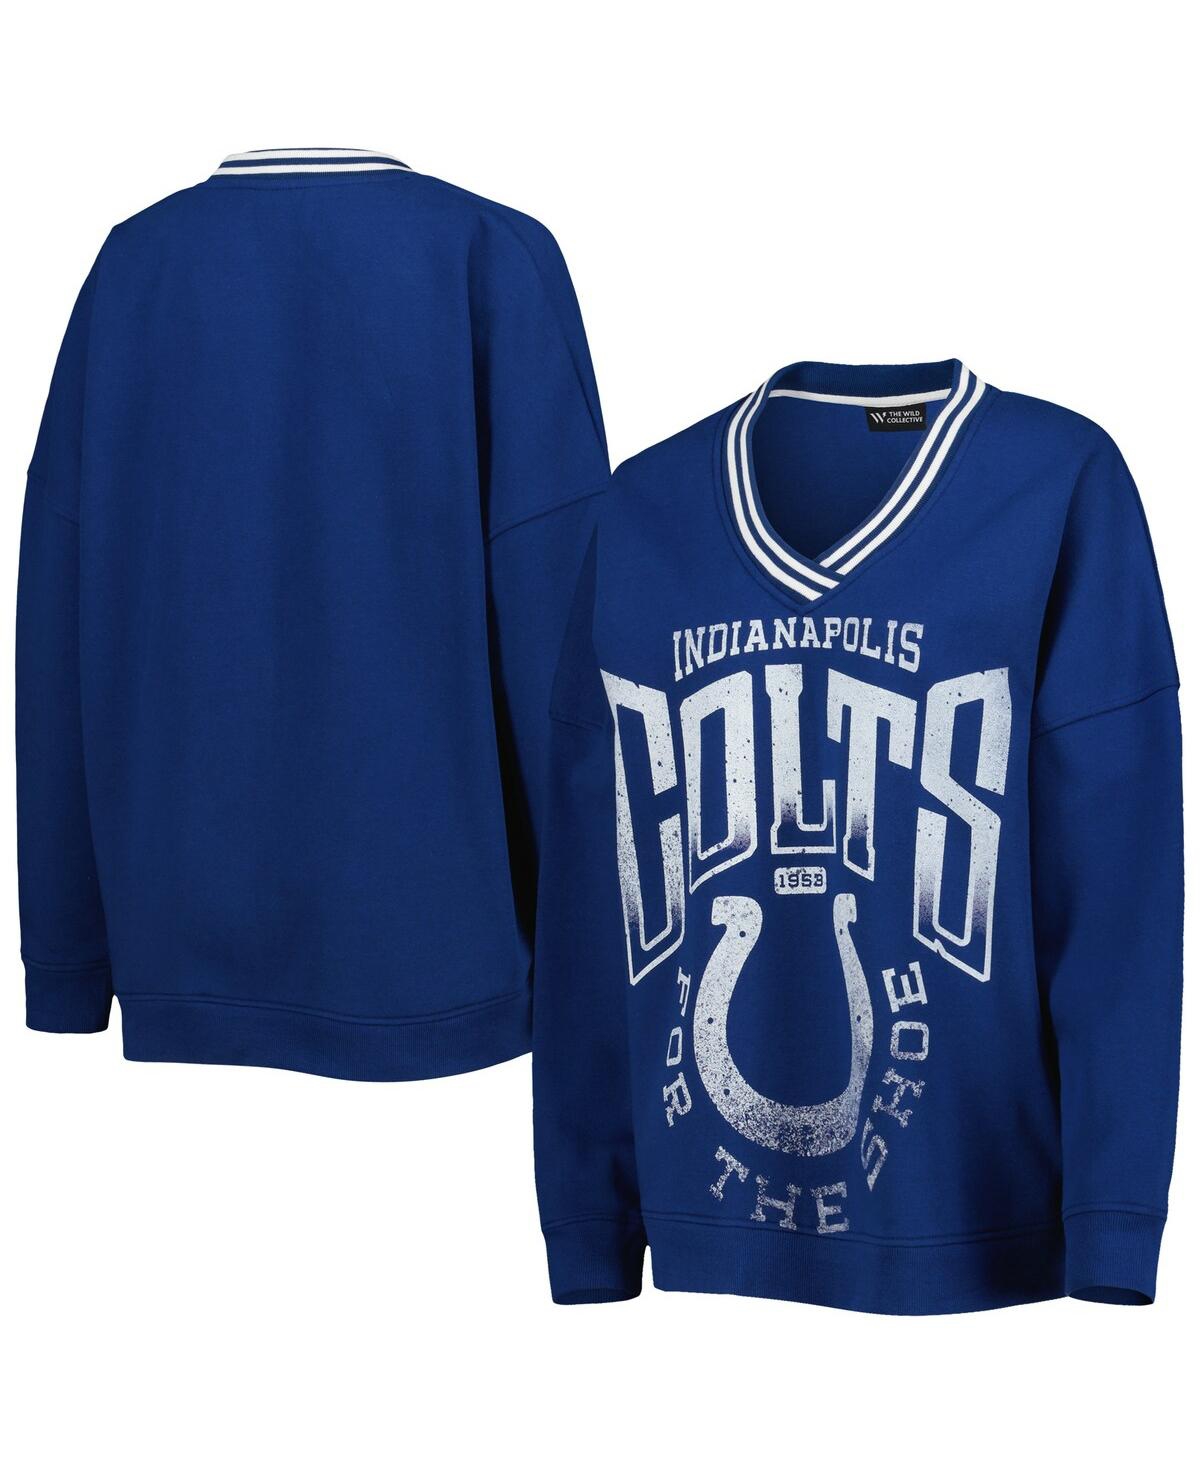 THE WILD COLLECTIVE WOMEN'S THE WILD COLLECTIVE ROYAL INDIANAPOLIS COLTS VINTAGE-INSPIRED V-NECK PULLOVER SWEATSHIRT